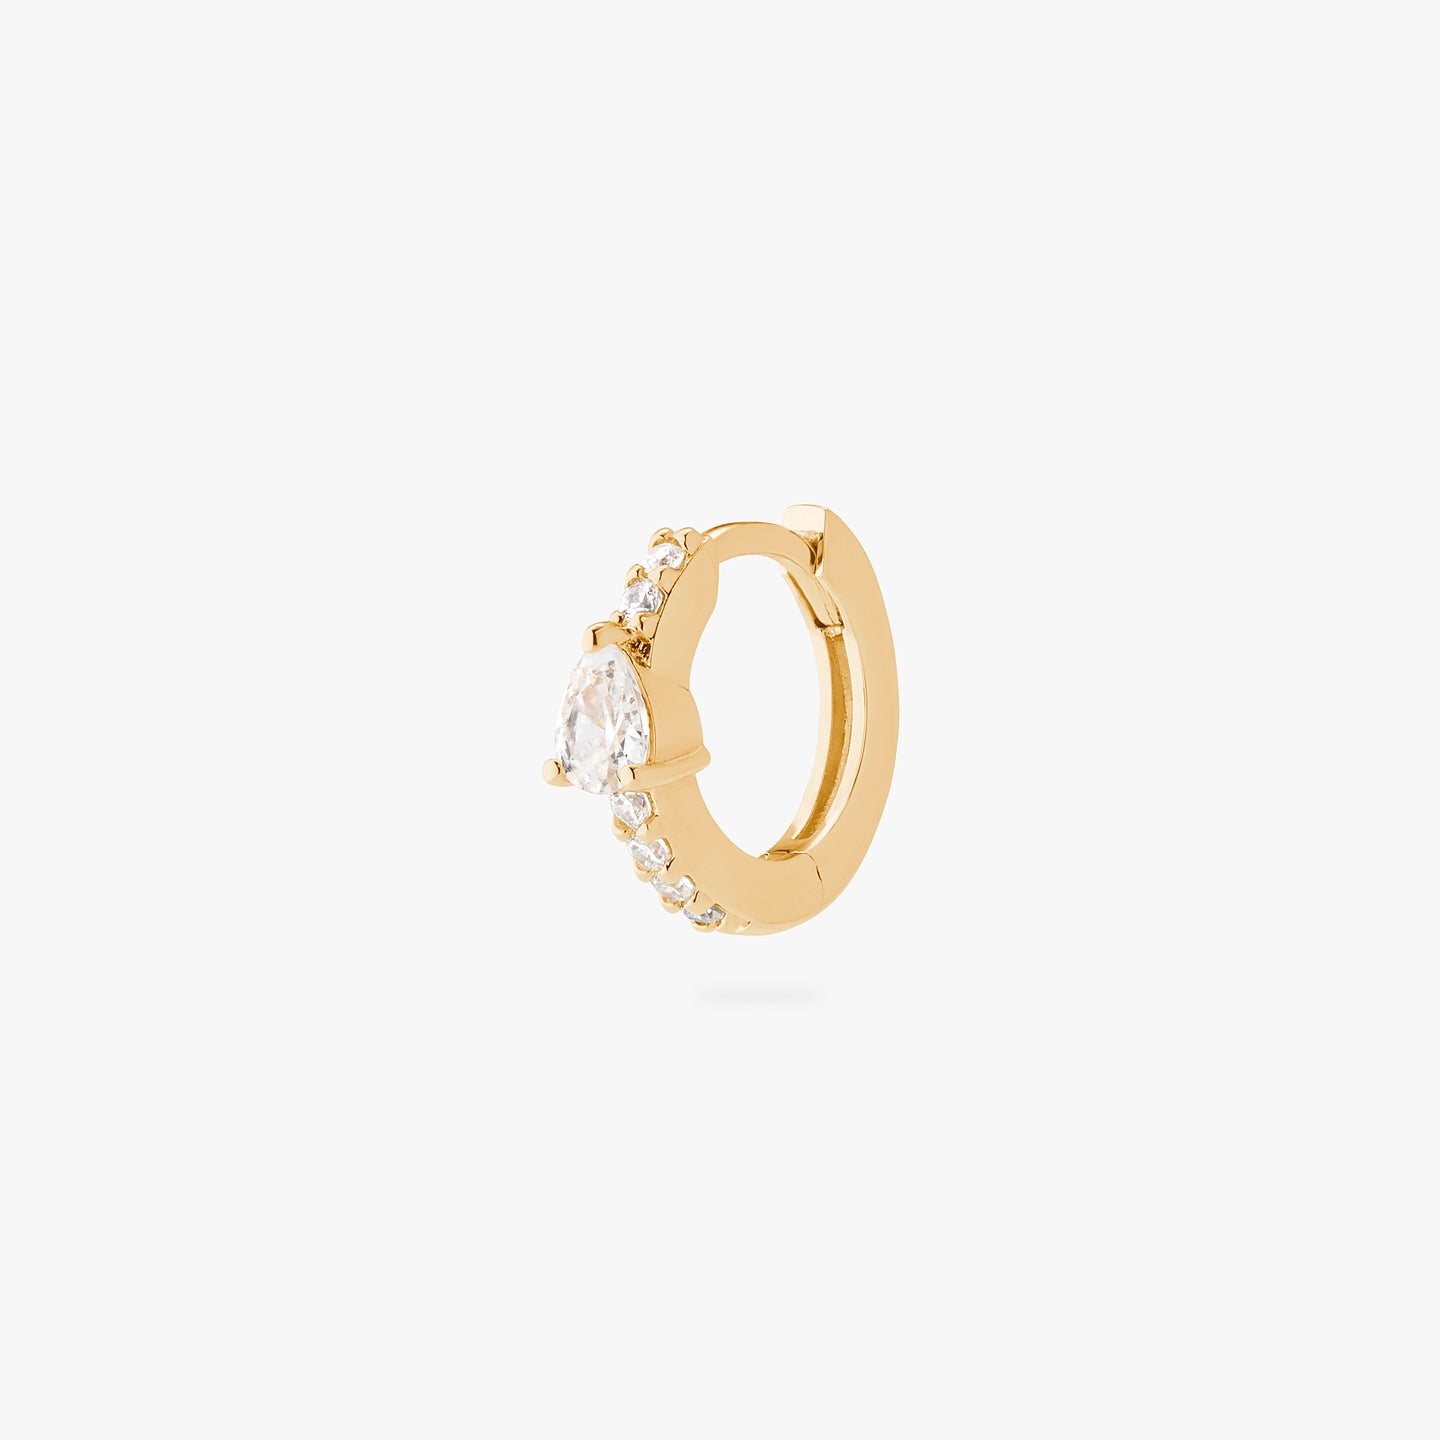 An image of a gold/clear mini pave huggie with a clear pear shaped CZ accent stone. color:null|gold/clear